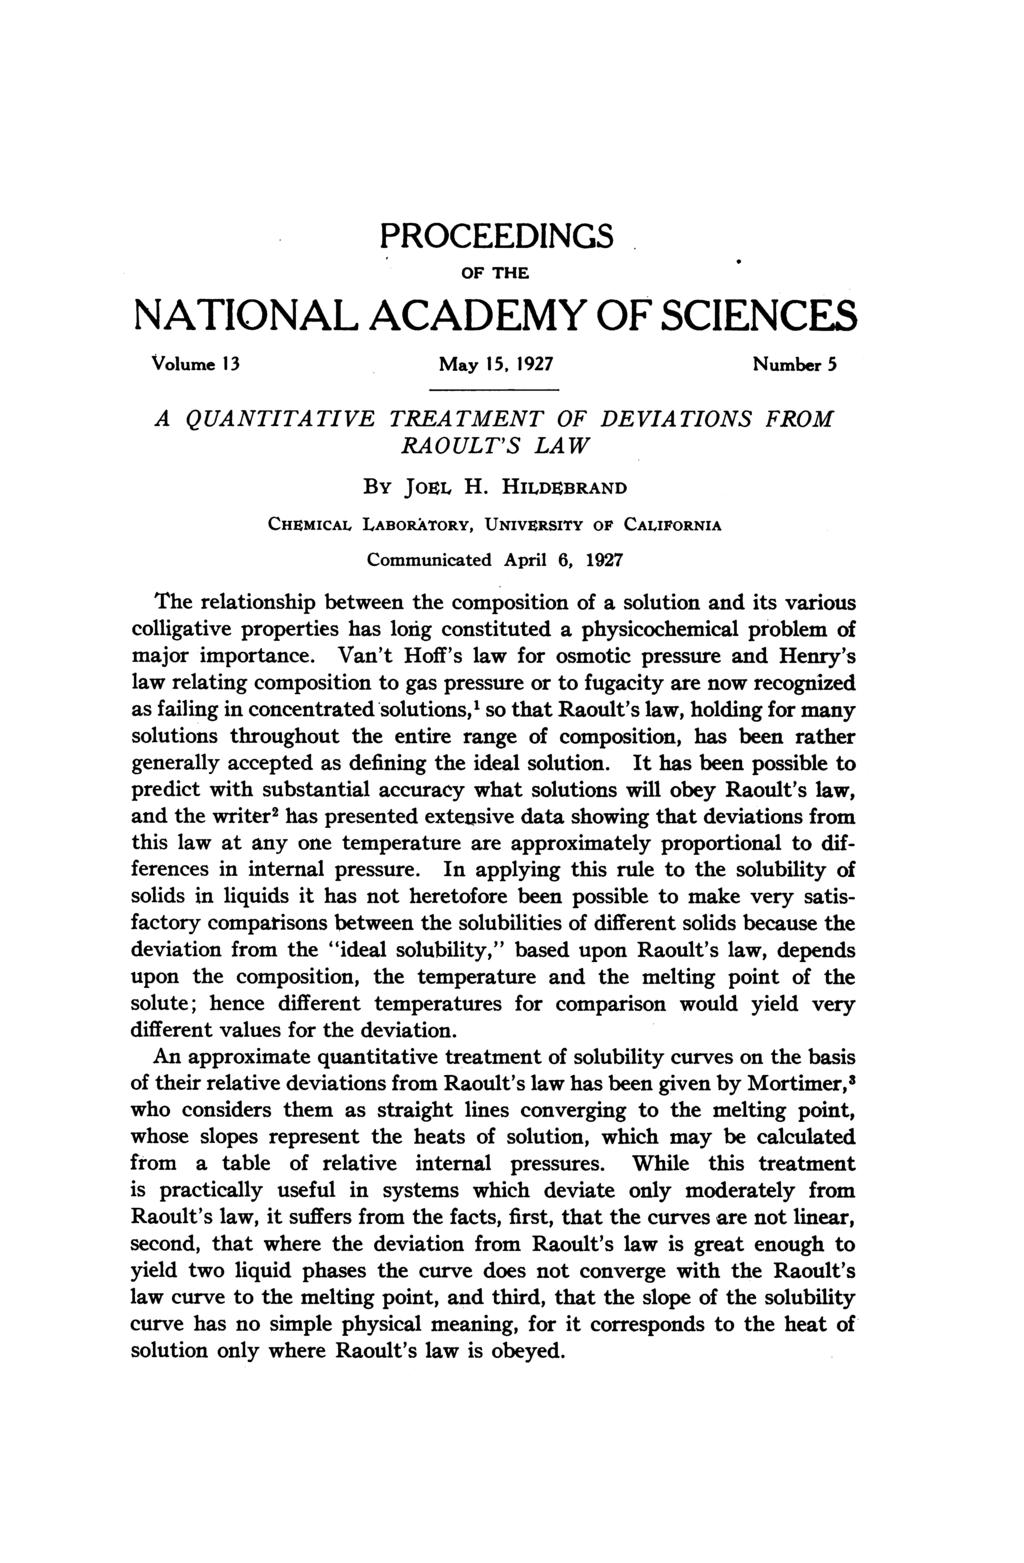 PROCEEDINGS OF THE NATIONAL ACADEMY OF SCIENCES Volume 13 May 15, 1927 Number 5 A QUANTITATIVE TREATMENT OF DEVIATIONS FROM RAOULT'S LAW By JOzL H.